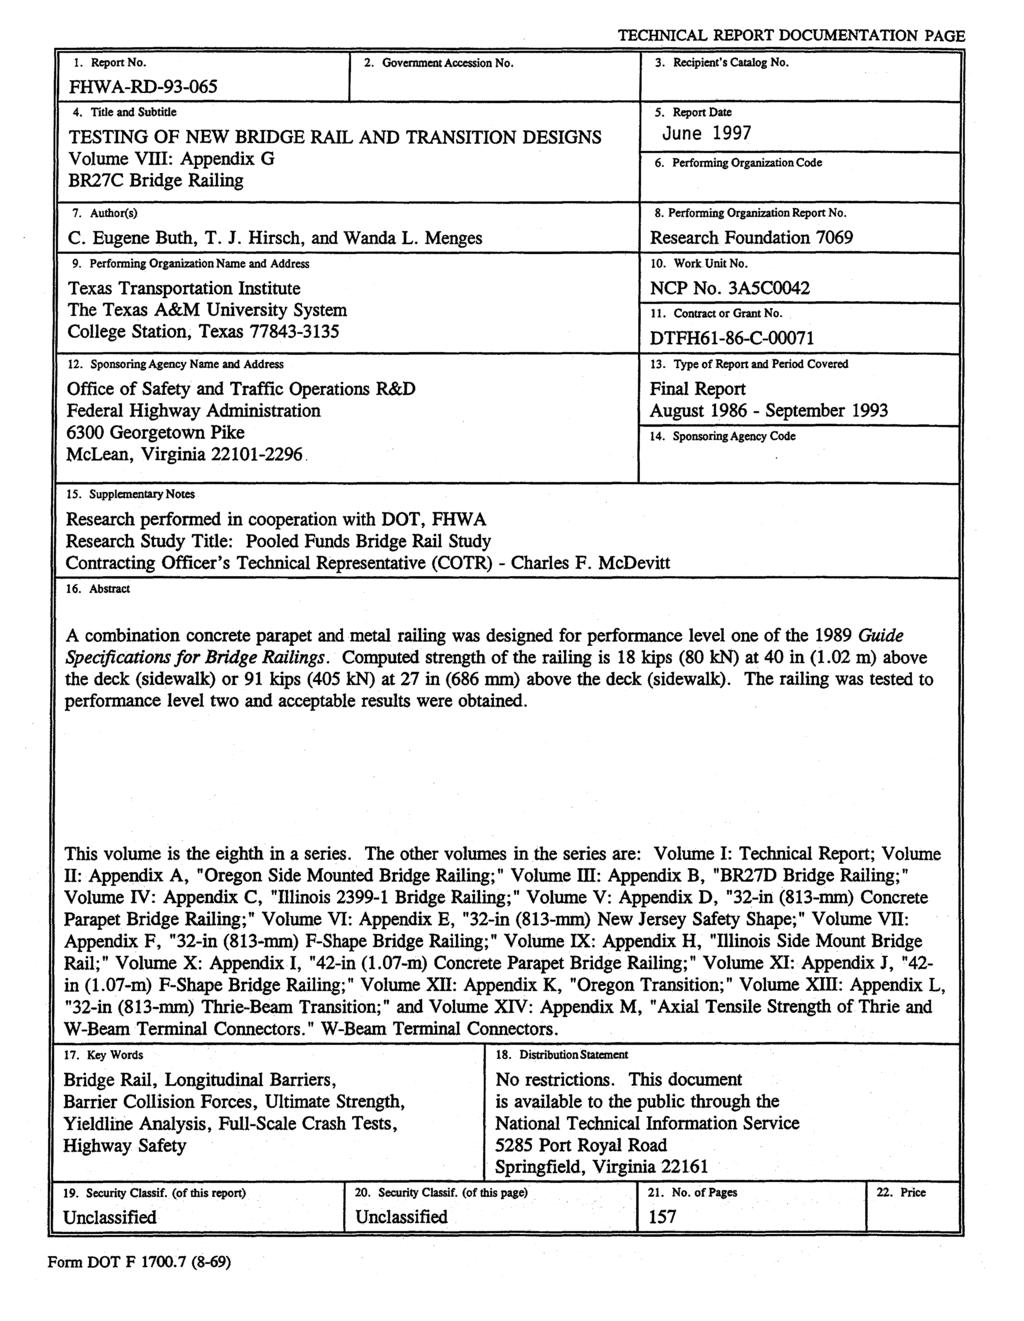 TECHNICAL REPORT DOCUMENTATION PAGE 1. Report No. 2. Government Accession No. FHW A-RD-93-065 4.